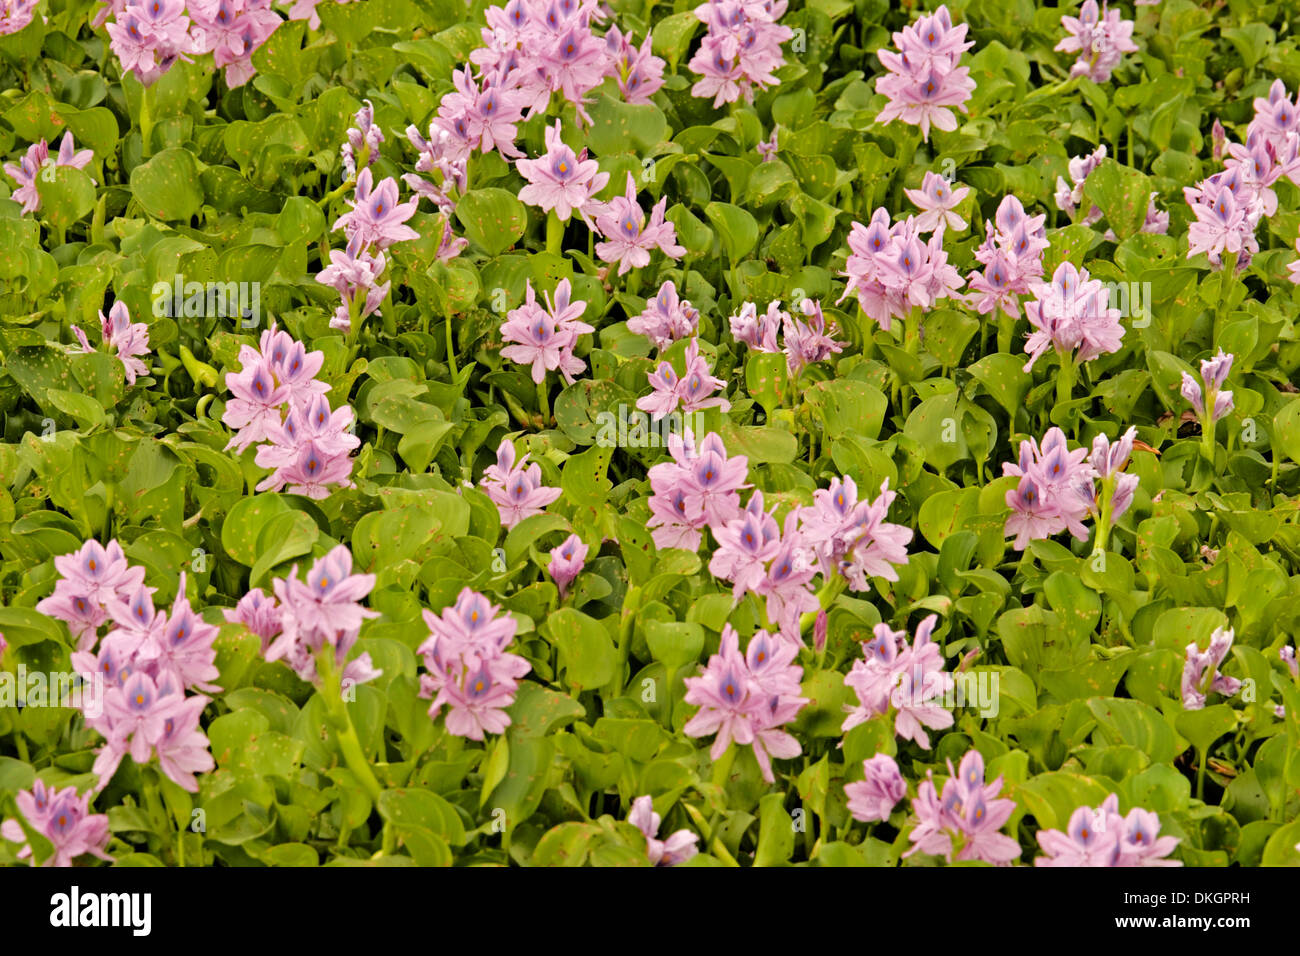 Mass of attractive pink / mauve flowers and dense foliage of water hyacinth Eichhornia crassipes completely covering surface of water of river in Aust Stock Photo